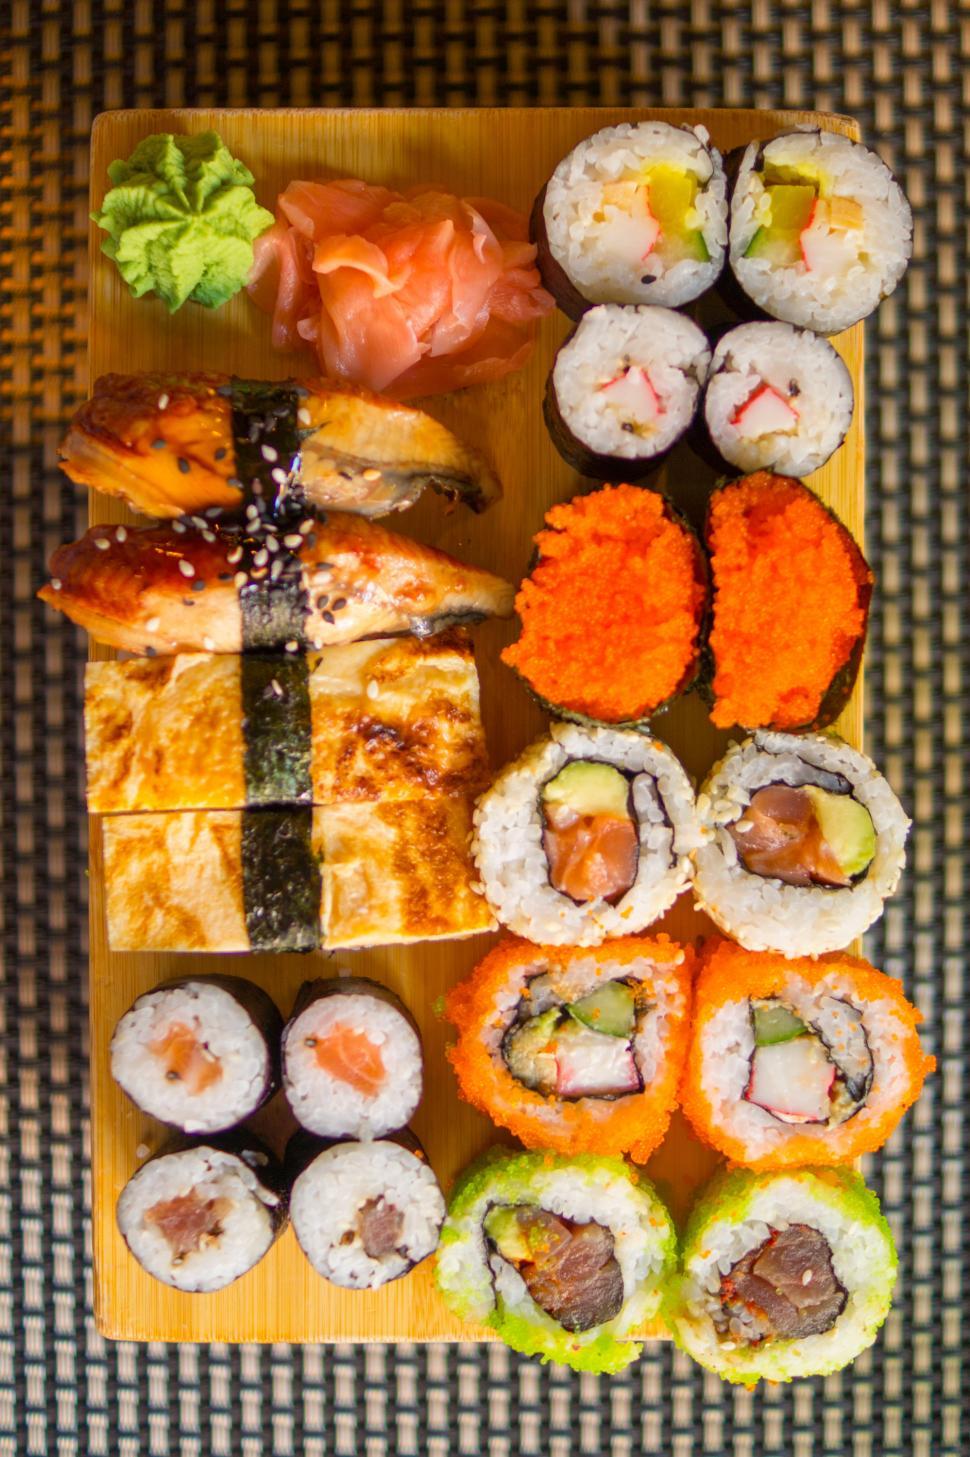 Free Image of Wooden Tray Filled With Sushi Platter 